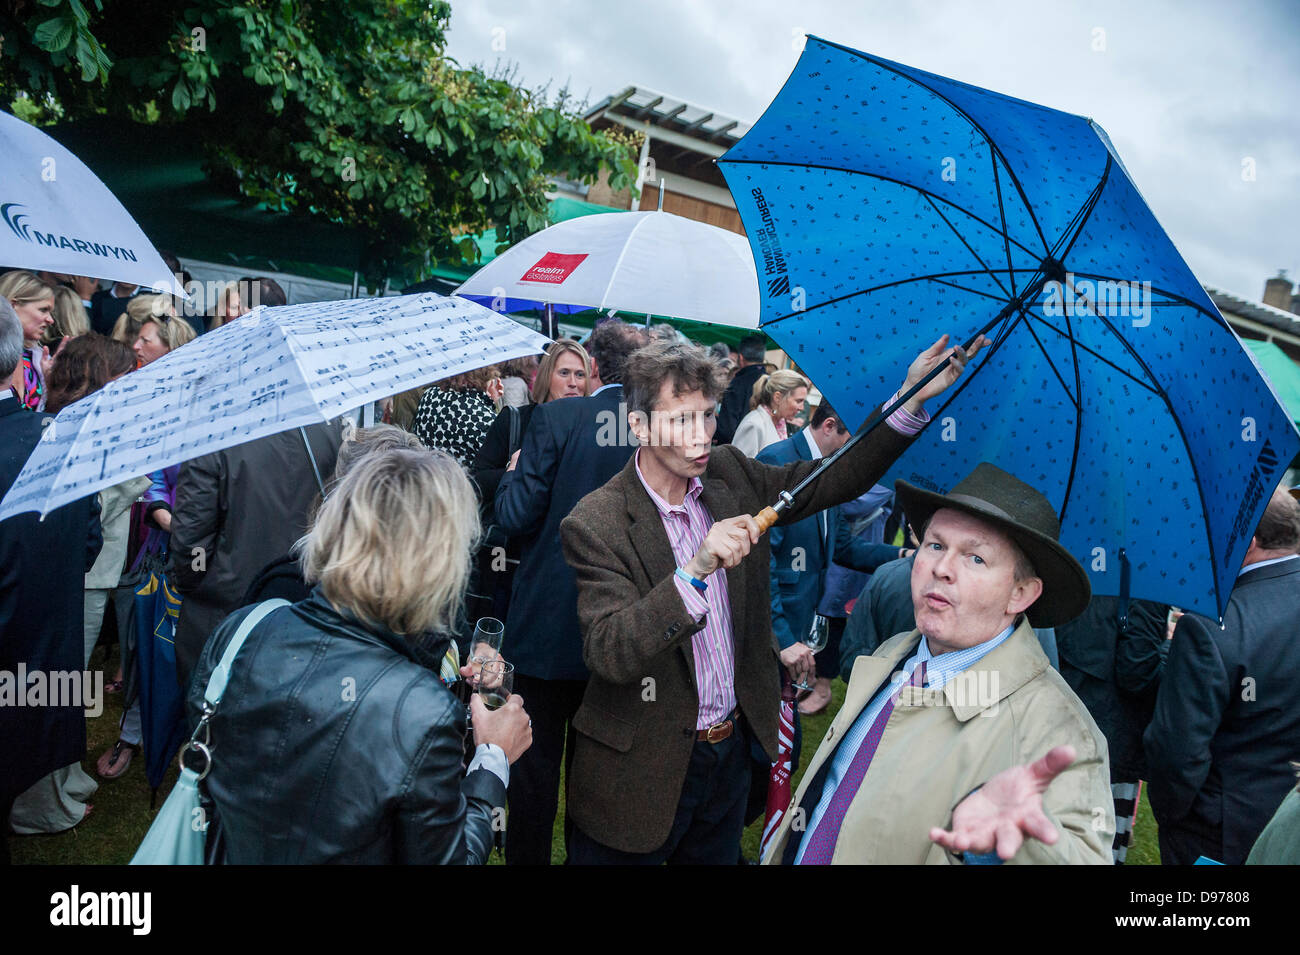 Clapham, London, UK. 12 June 2013.Heavy rain fails to dampen the spirits at the Wandsworth Friends of Trinity Hospice Summer Party. Clapham, London, 12 June 2013. Credit:  Guy Bell/Alamy Live News Stock Photo